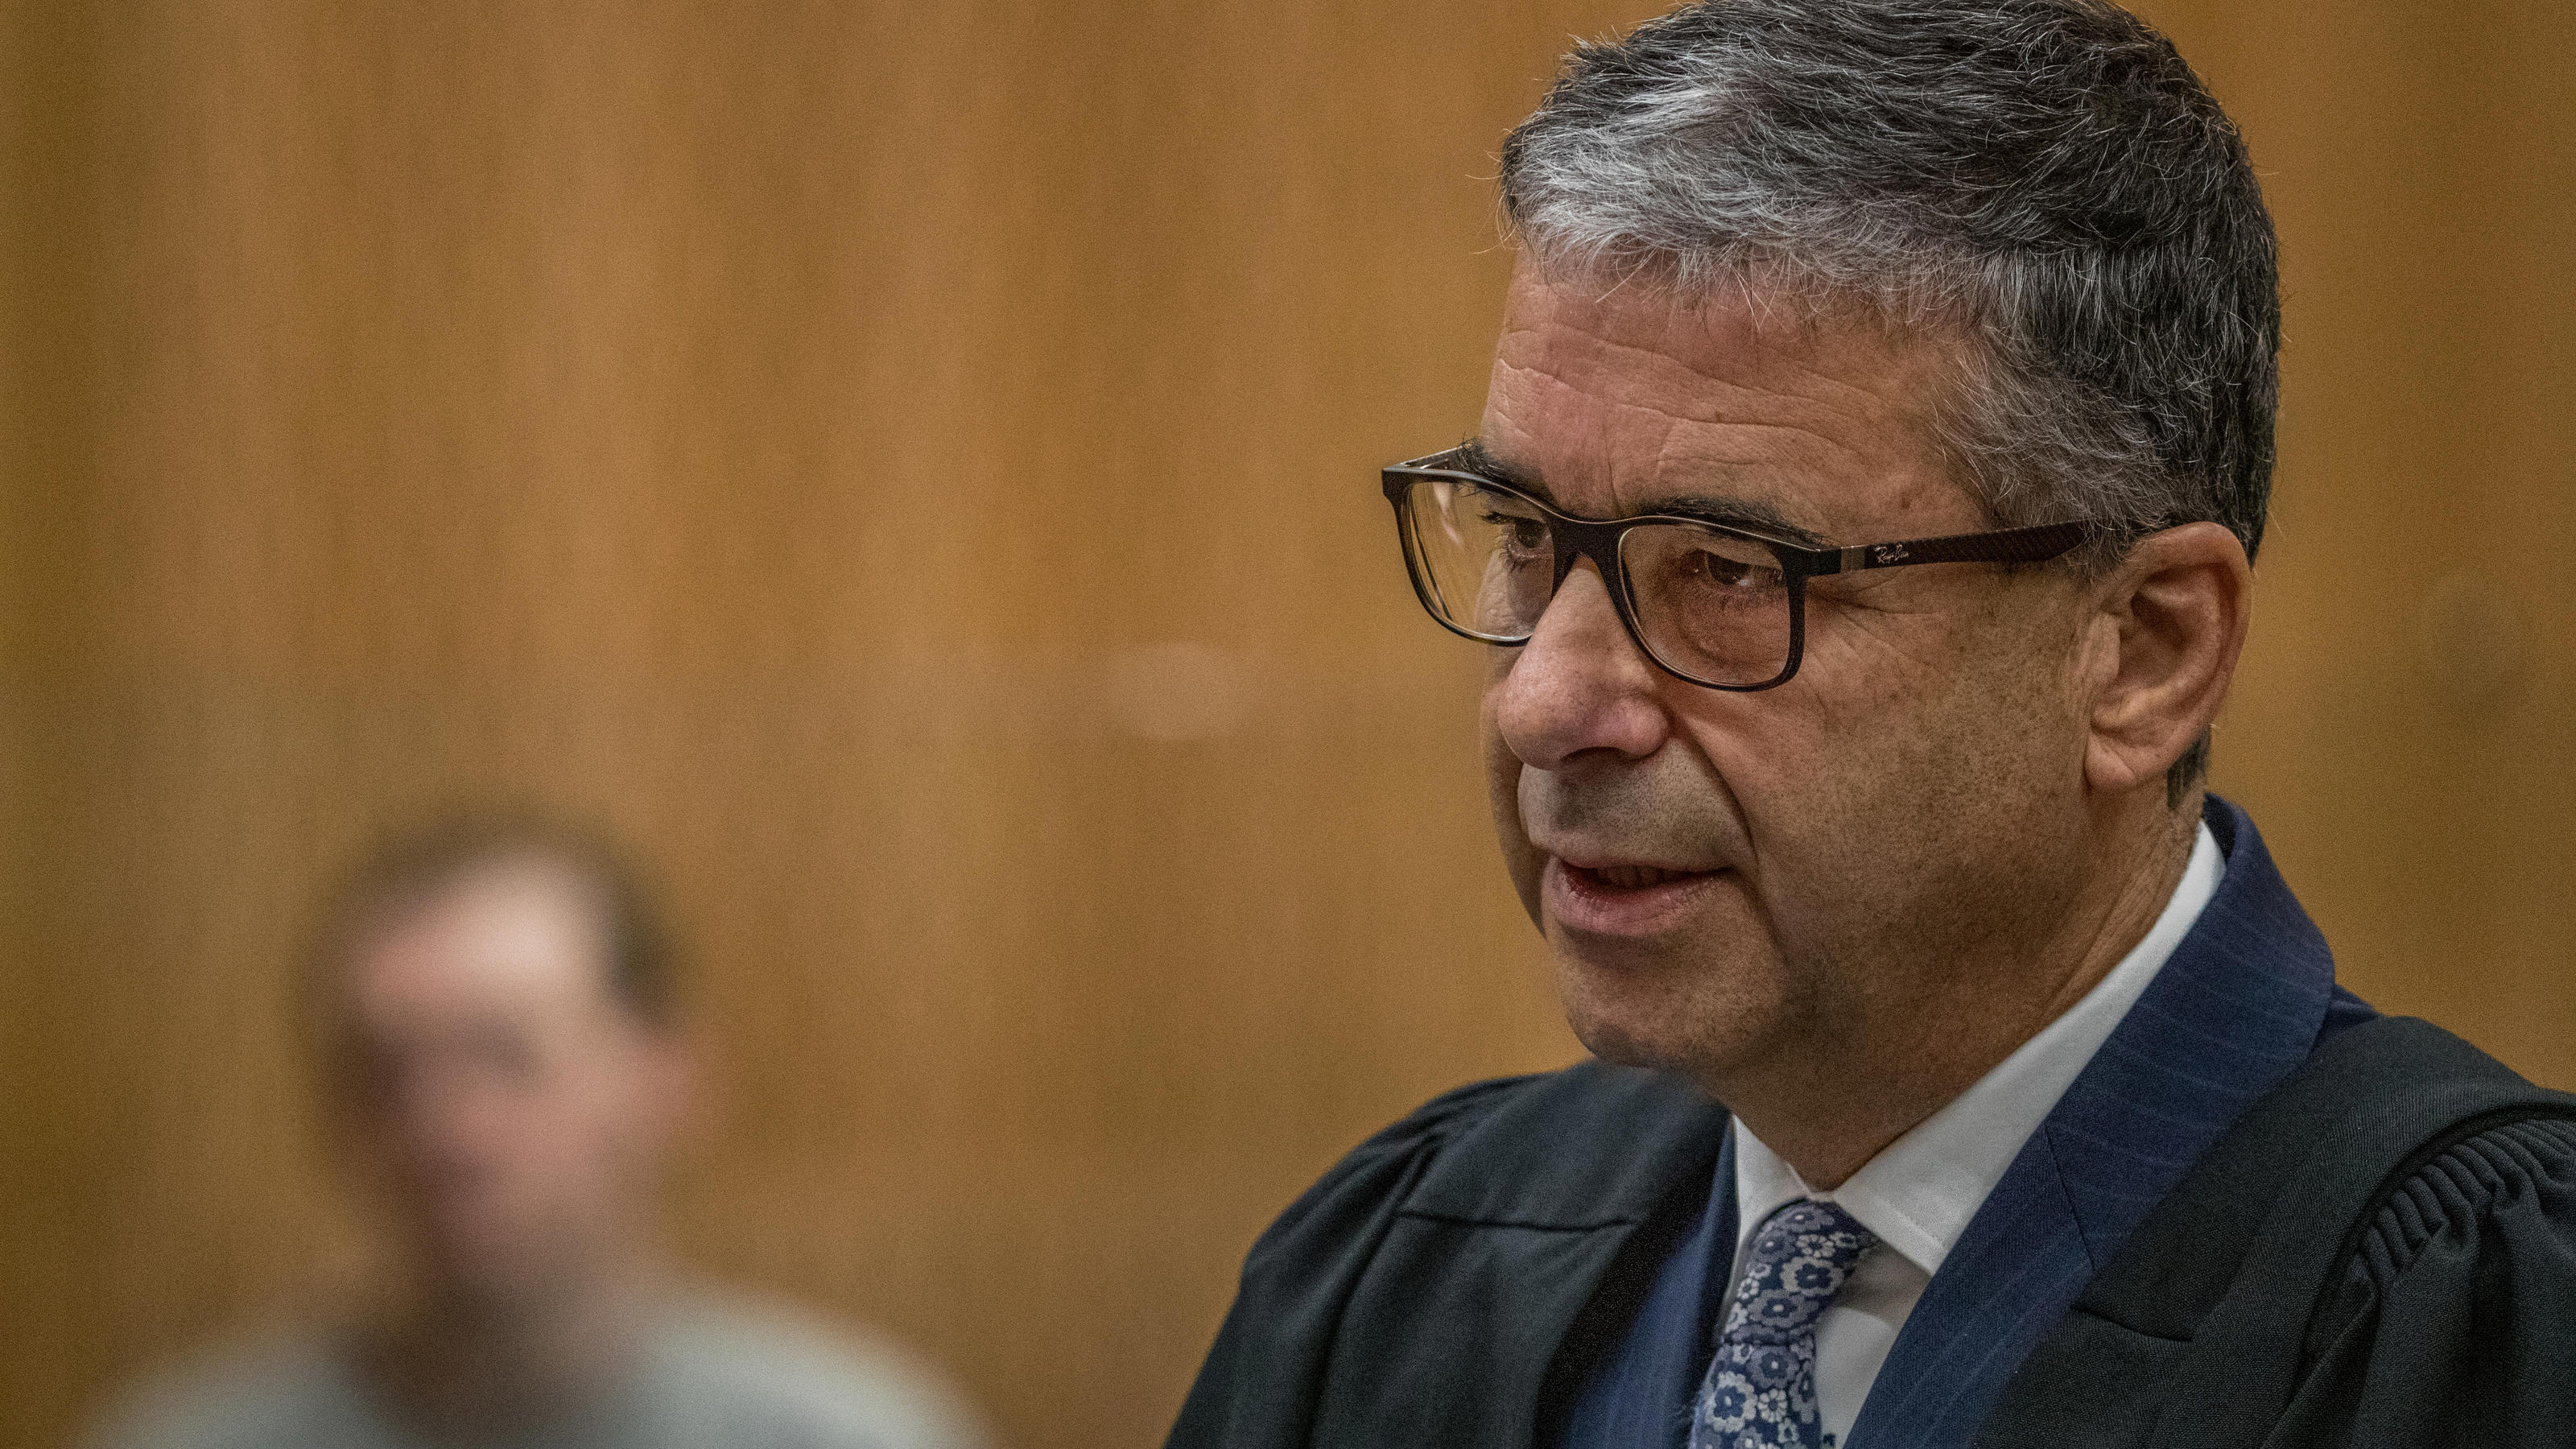 Crown prosecutor Mark Zarifeh delivers his submission during the sentencing of the gunman who shot and killed worshippers in the Christchurch mosque attacks, at the High Court in Christchurch, New Zealand, August 27, 2020.  John Kirk